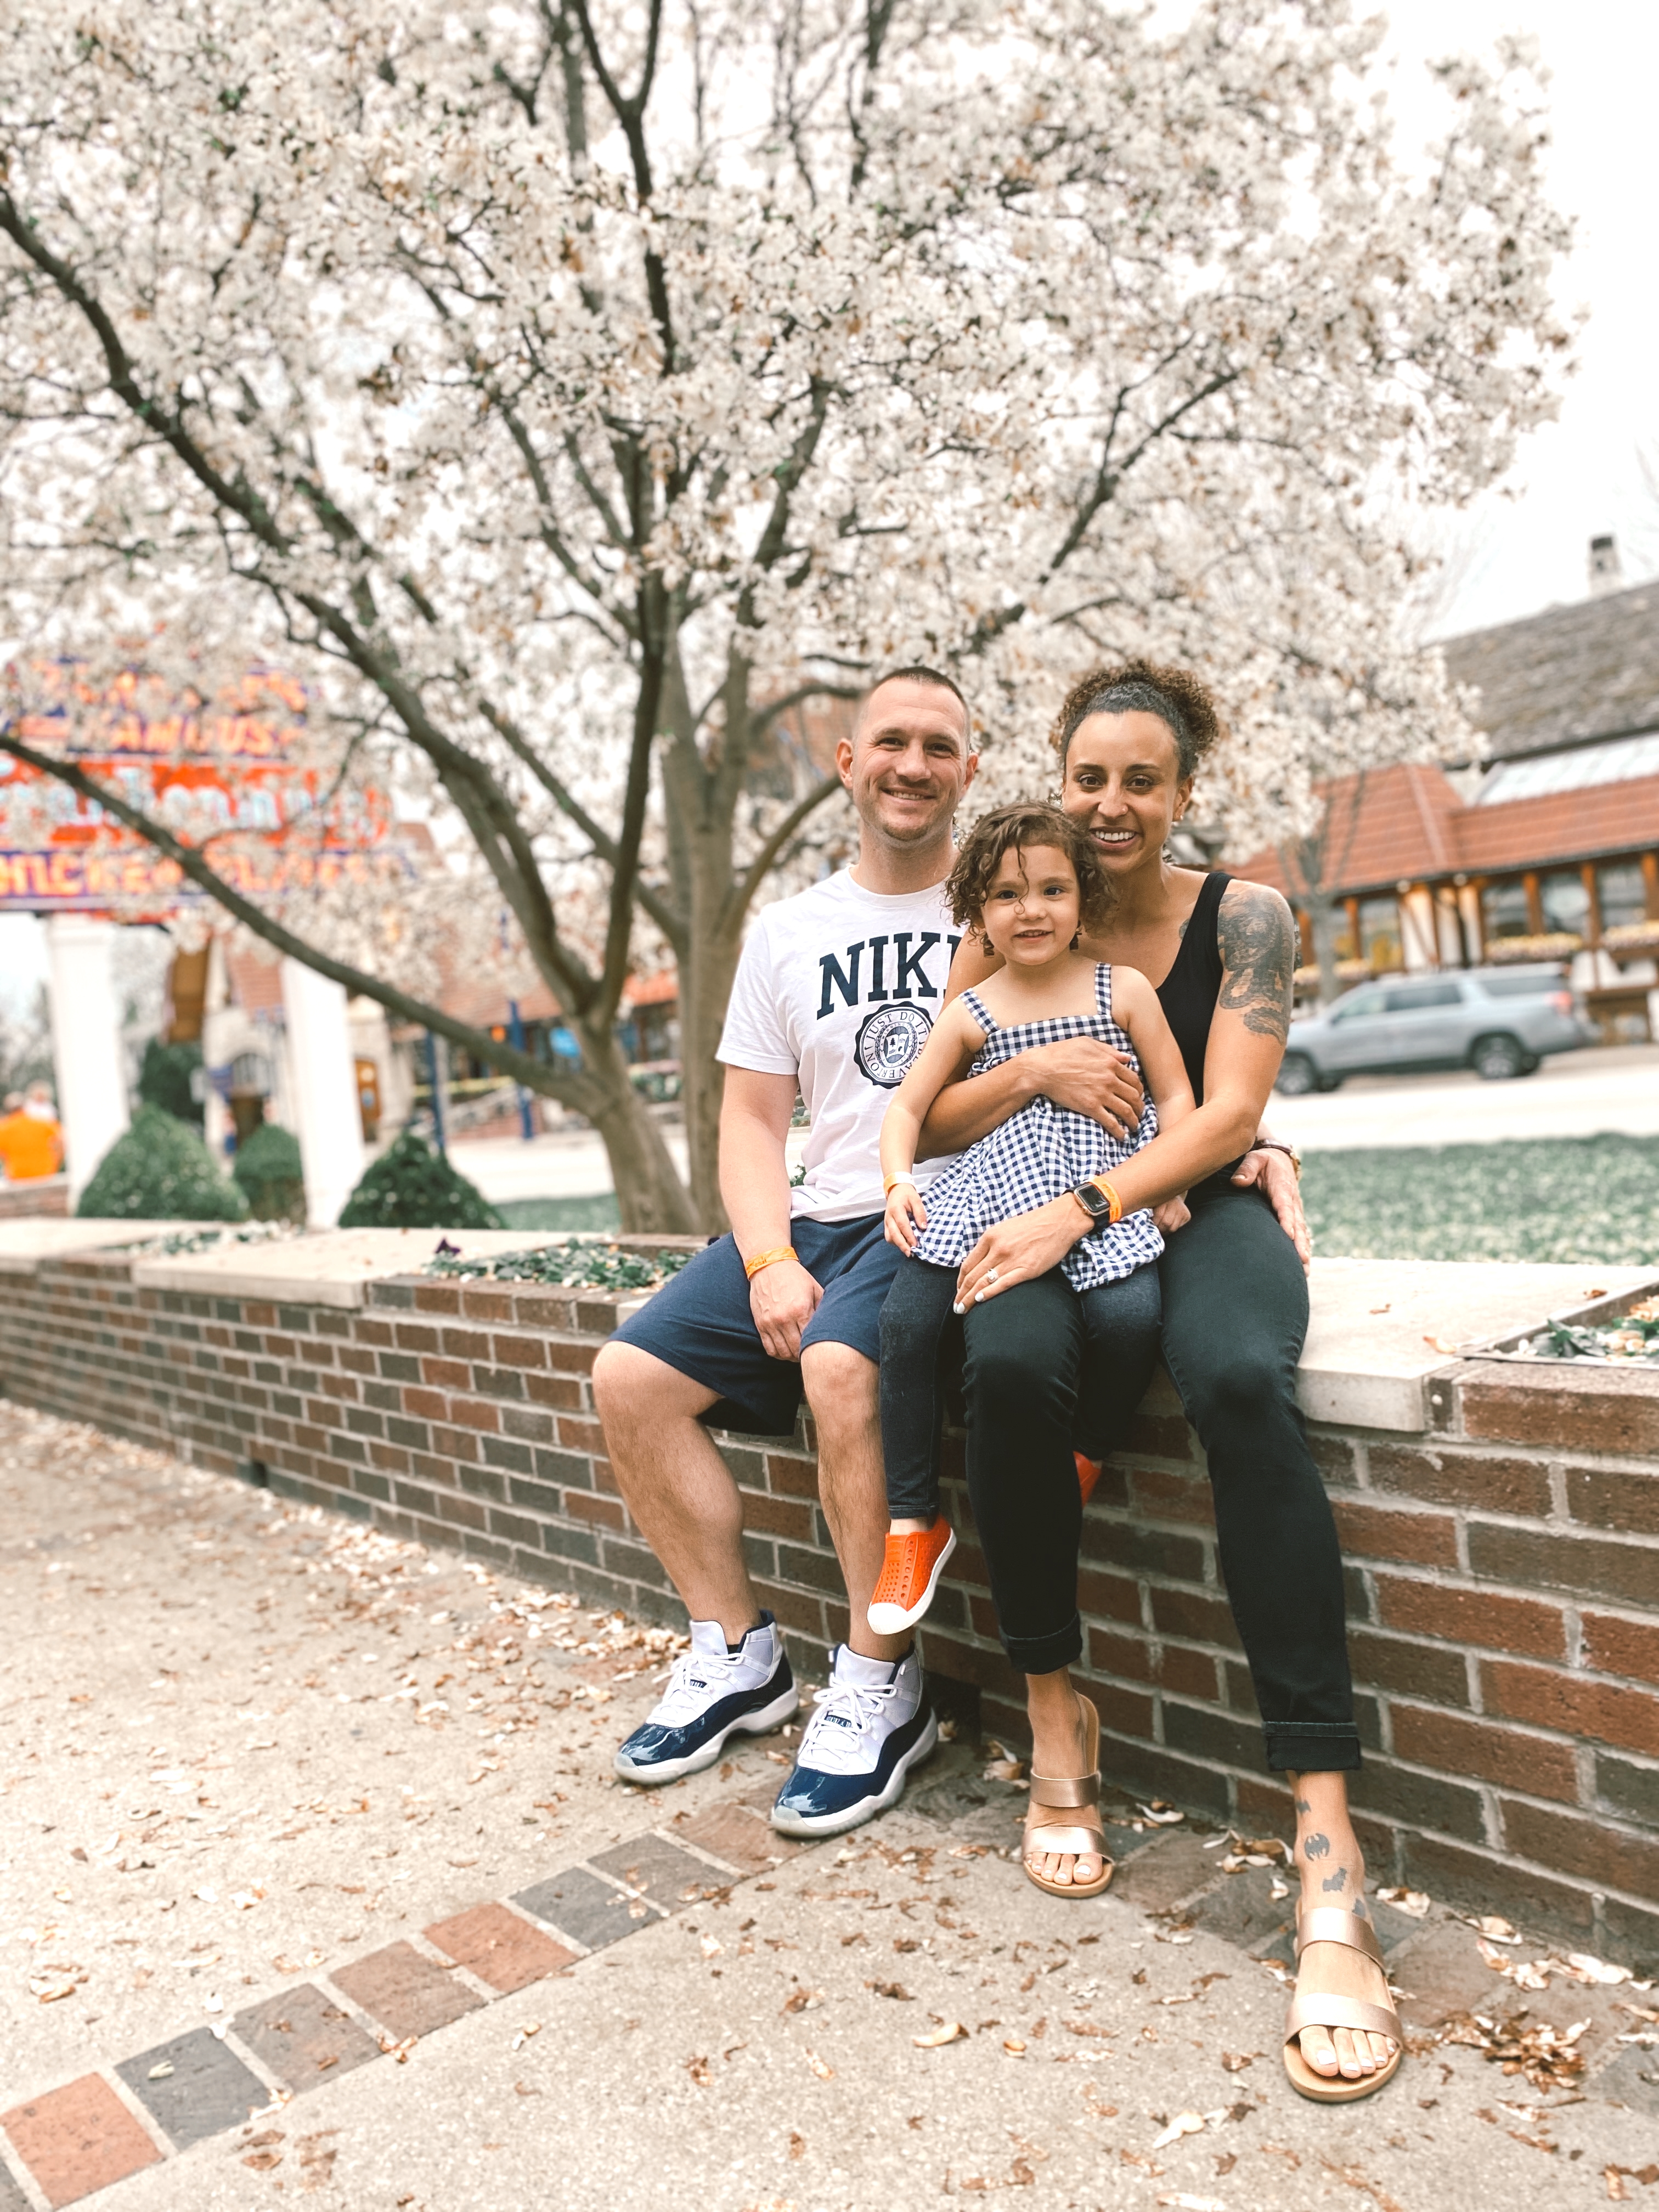 image of a family sitting on a brick ledge. There is a caucasian man, a mixed race woman, and a little girl. There is a big flowering tree in the background.